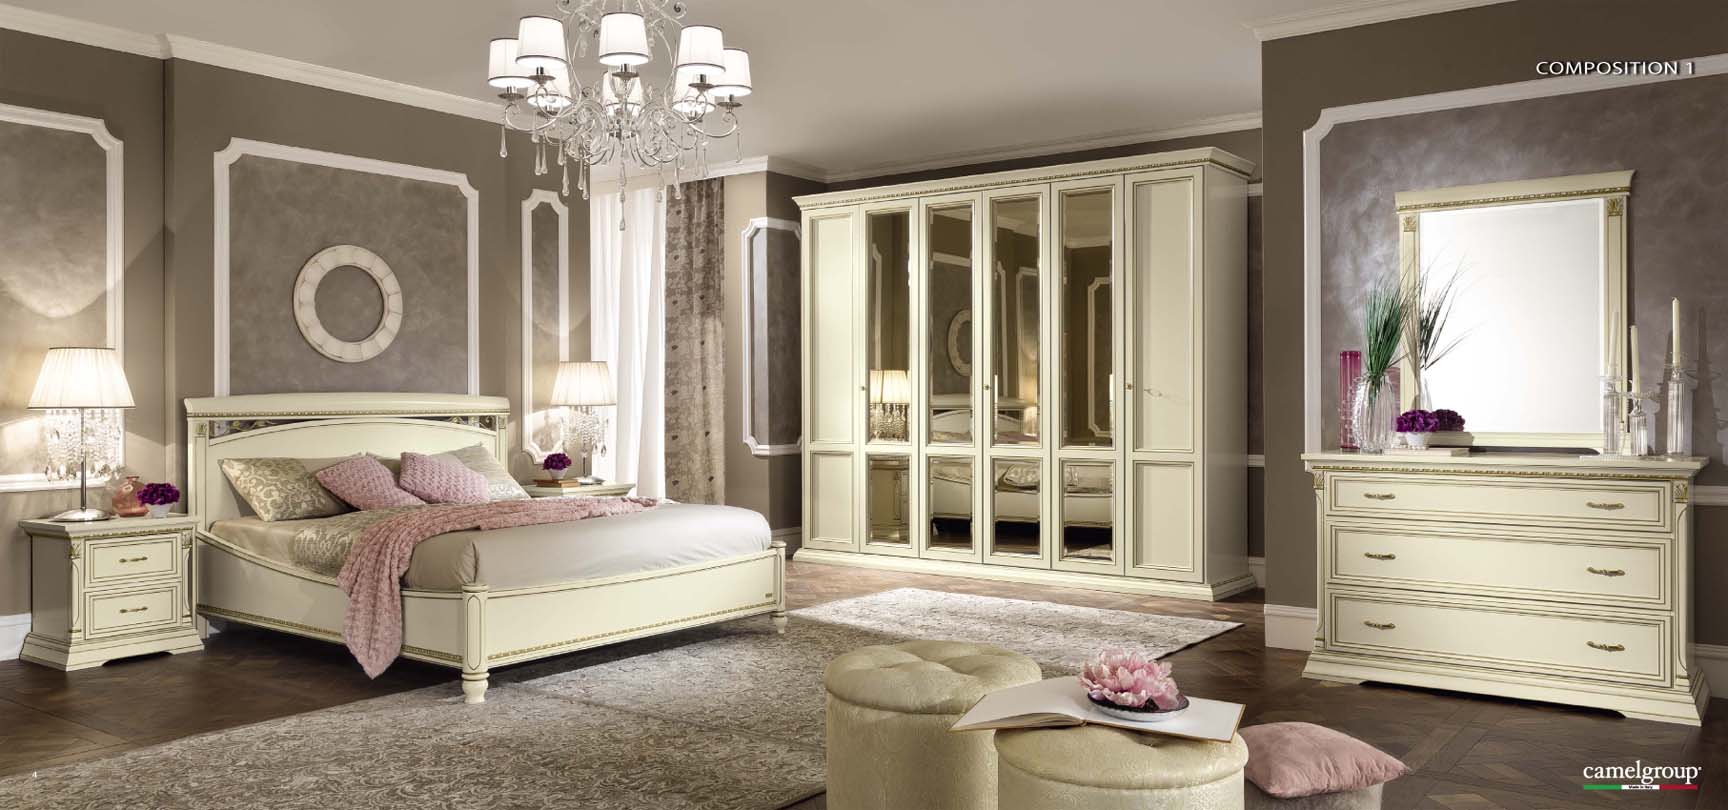 Bedroom Furniture Classic Bedrooms QS and KS Treviso Night Composition 1 in White Ash